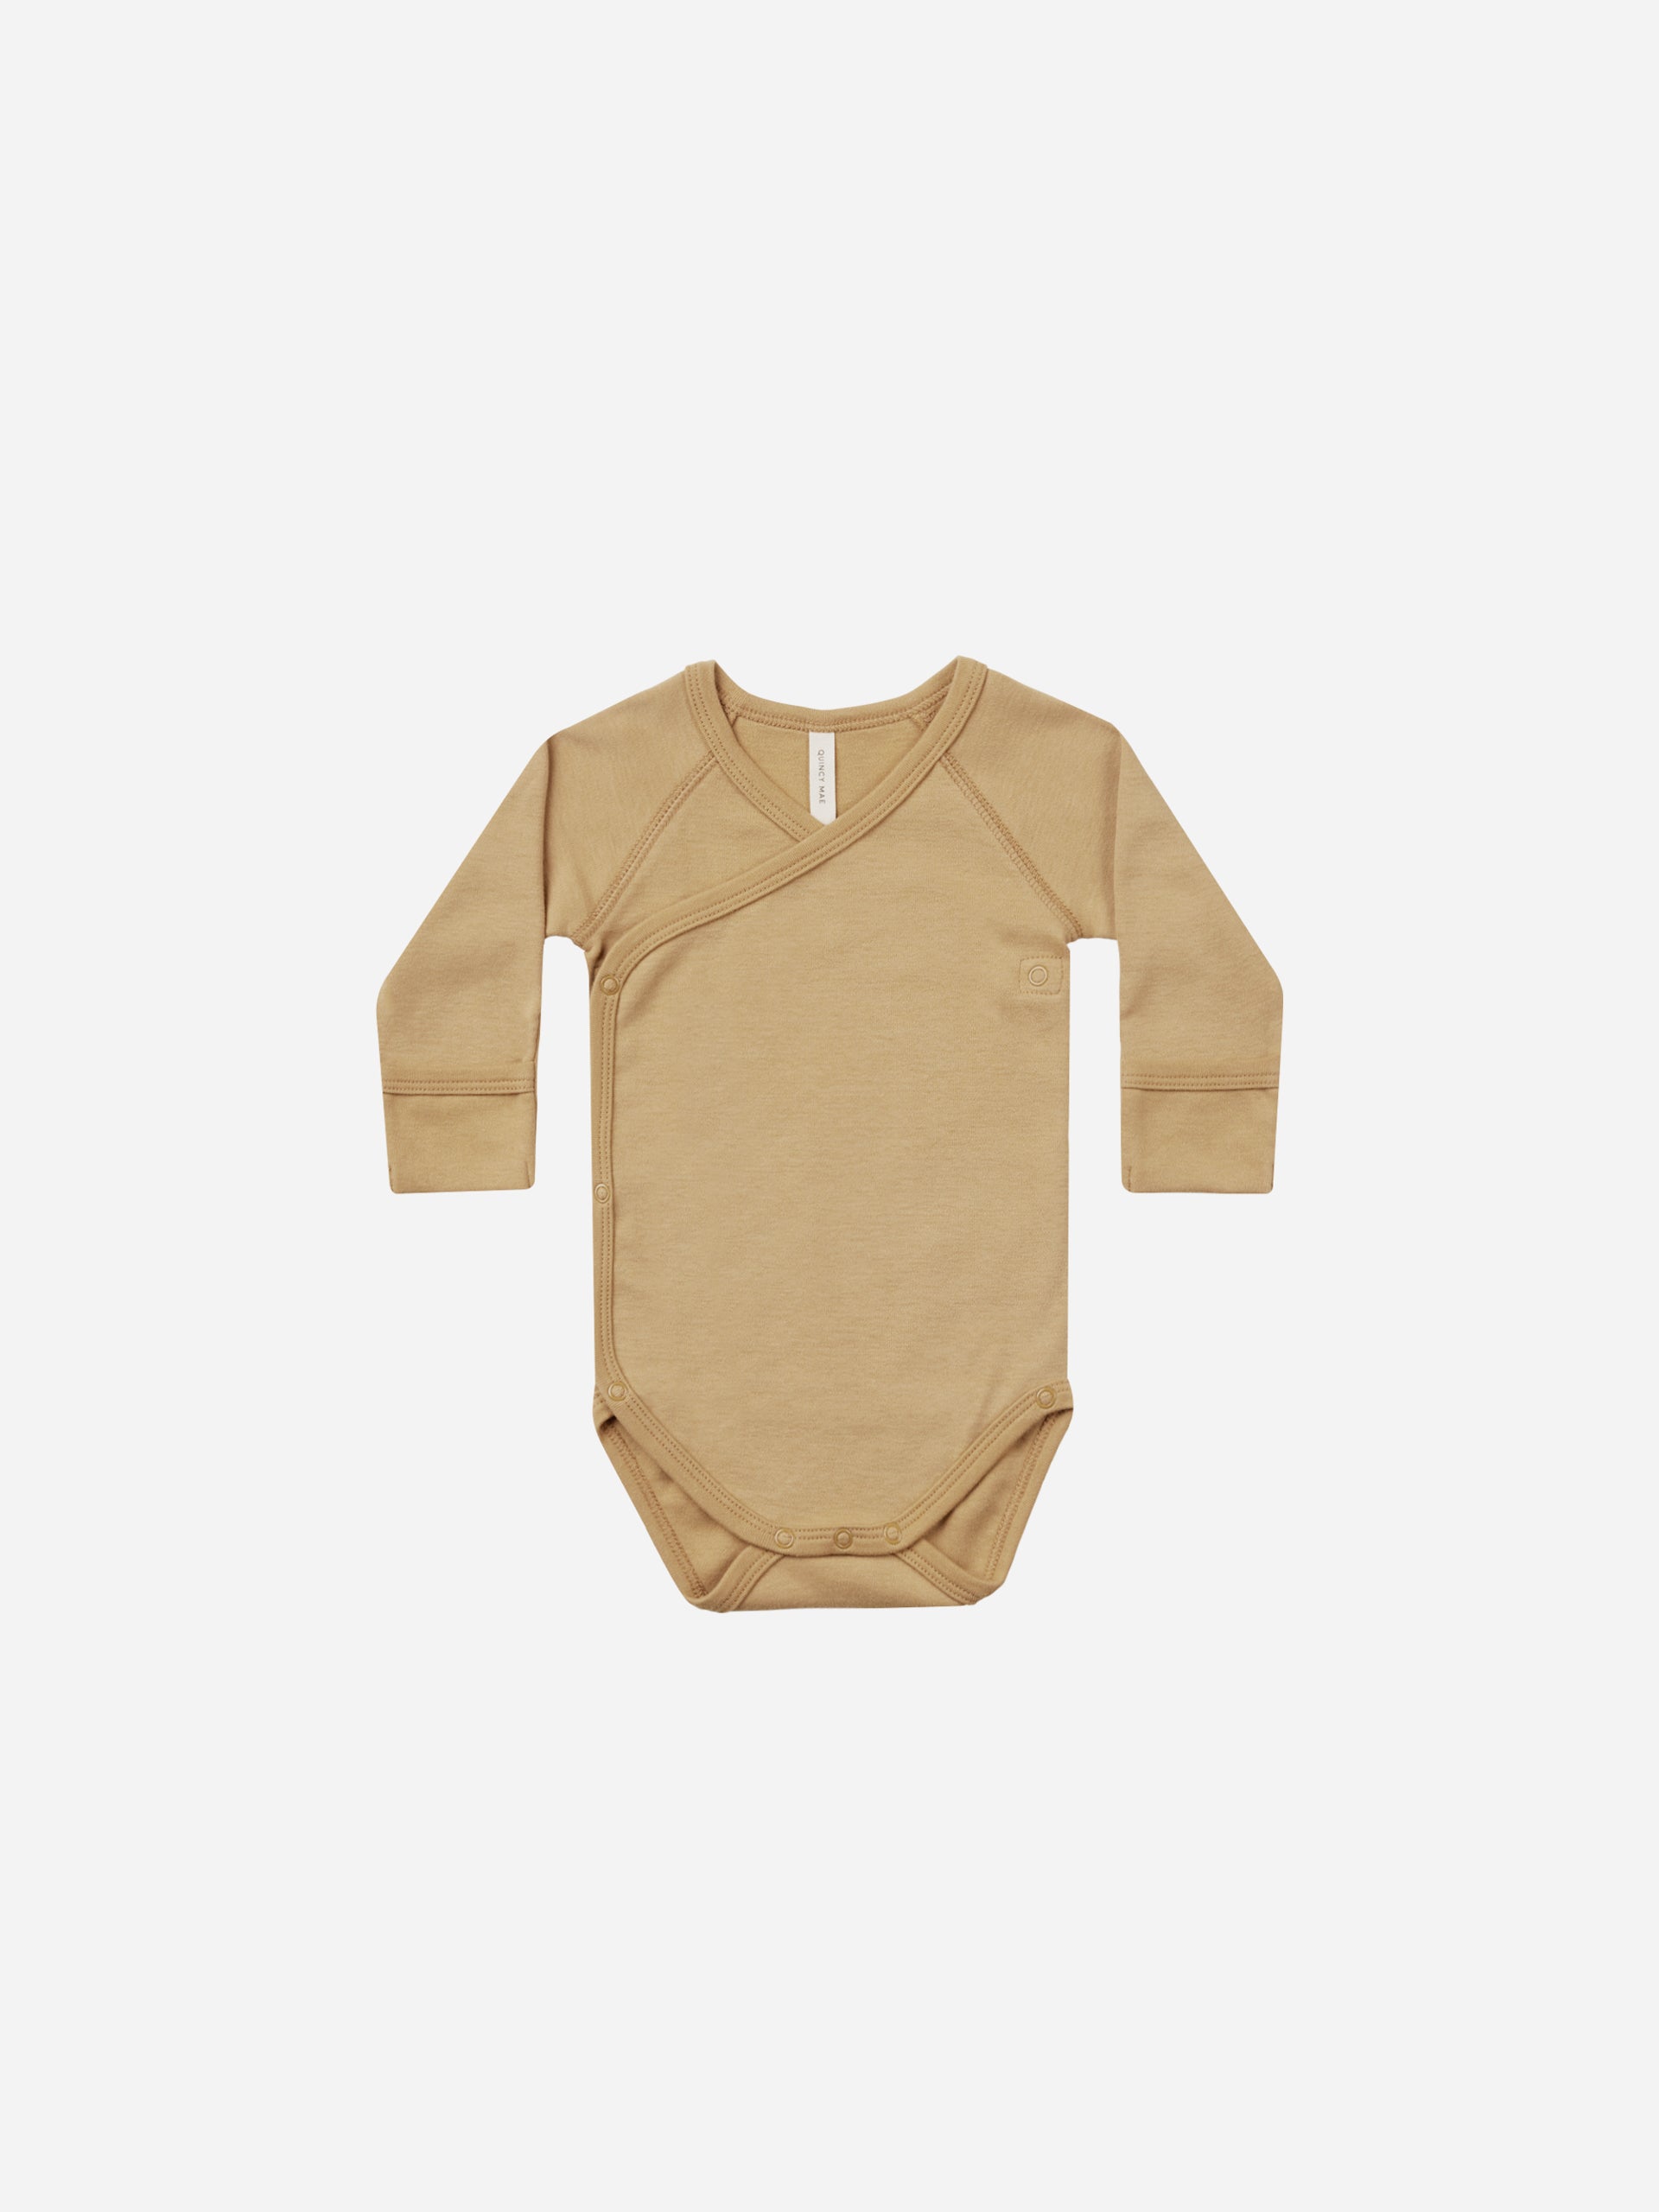 Side Snap Bodysuit || Honey - Rylee + Cru | Kids Clothes | Trendy Baby Clothes | Modern Infant Outfits |